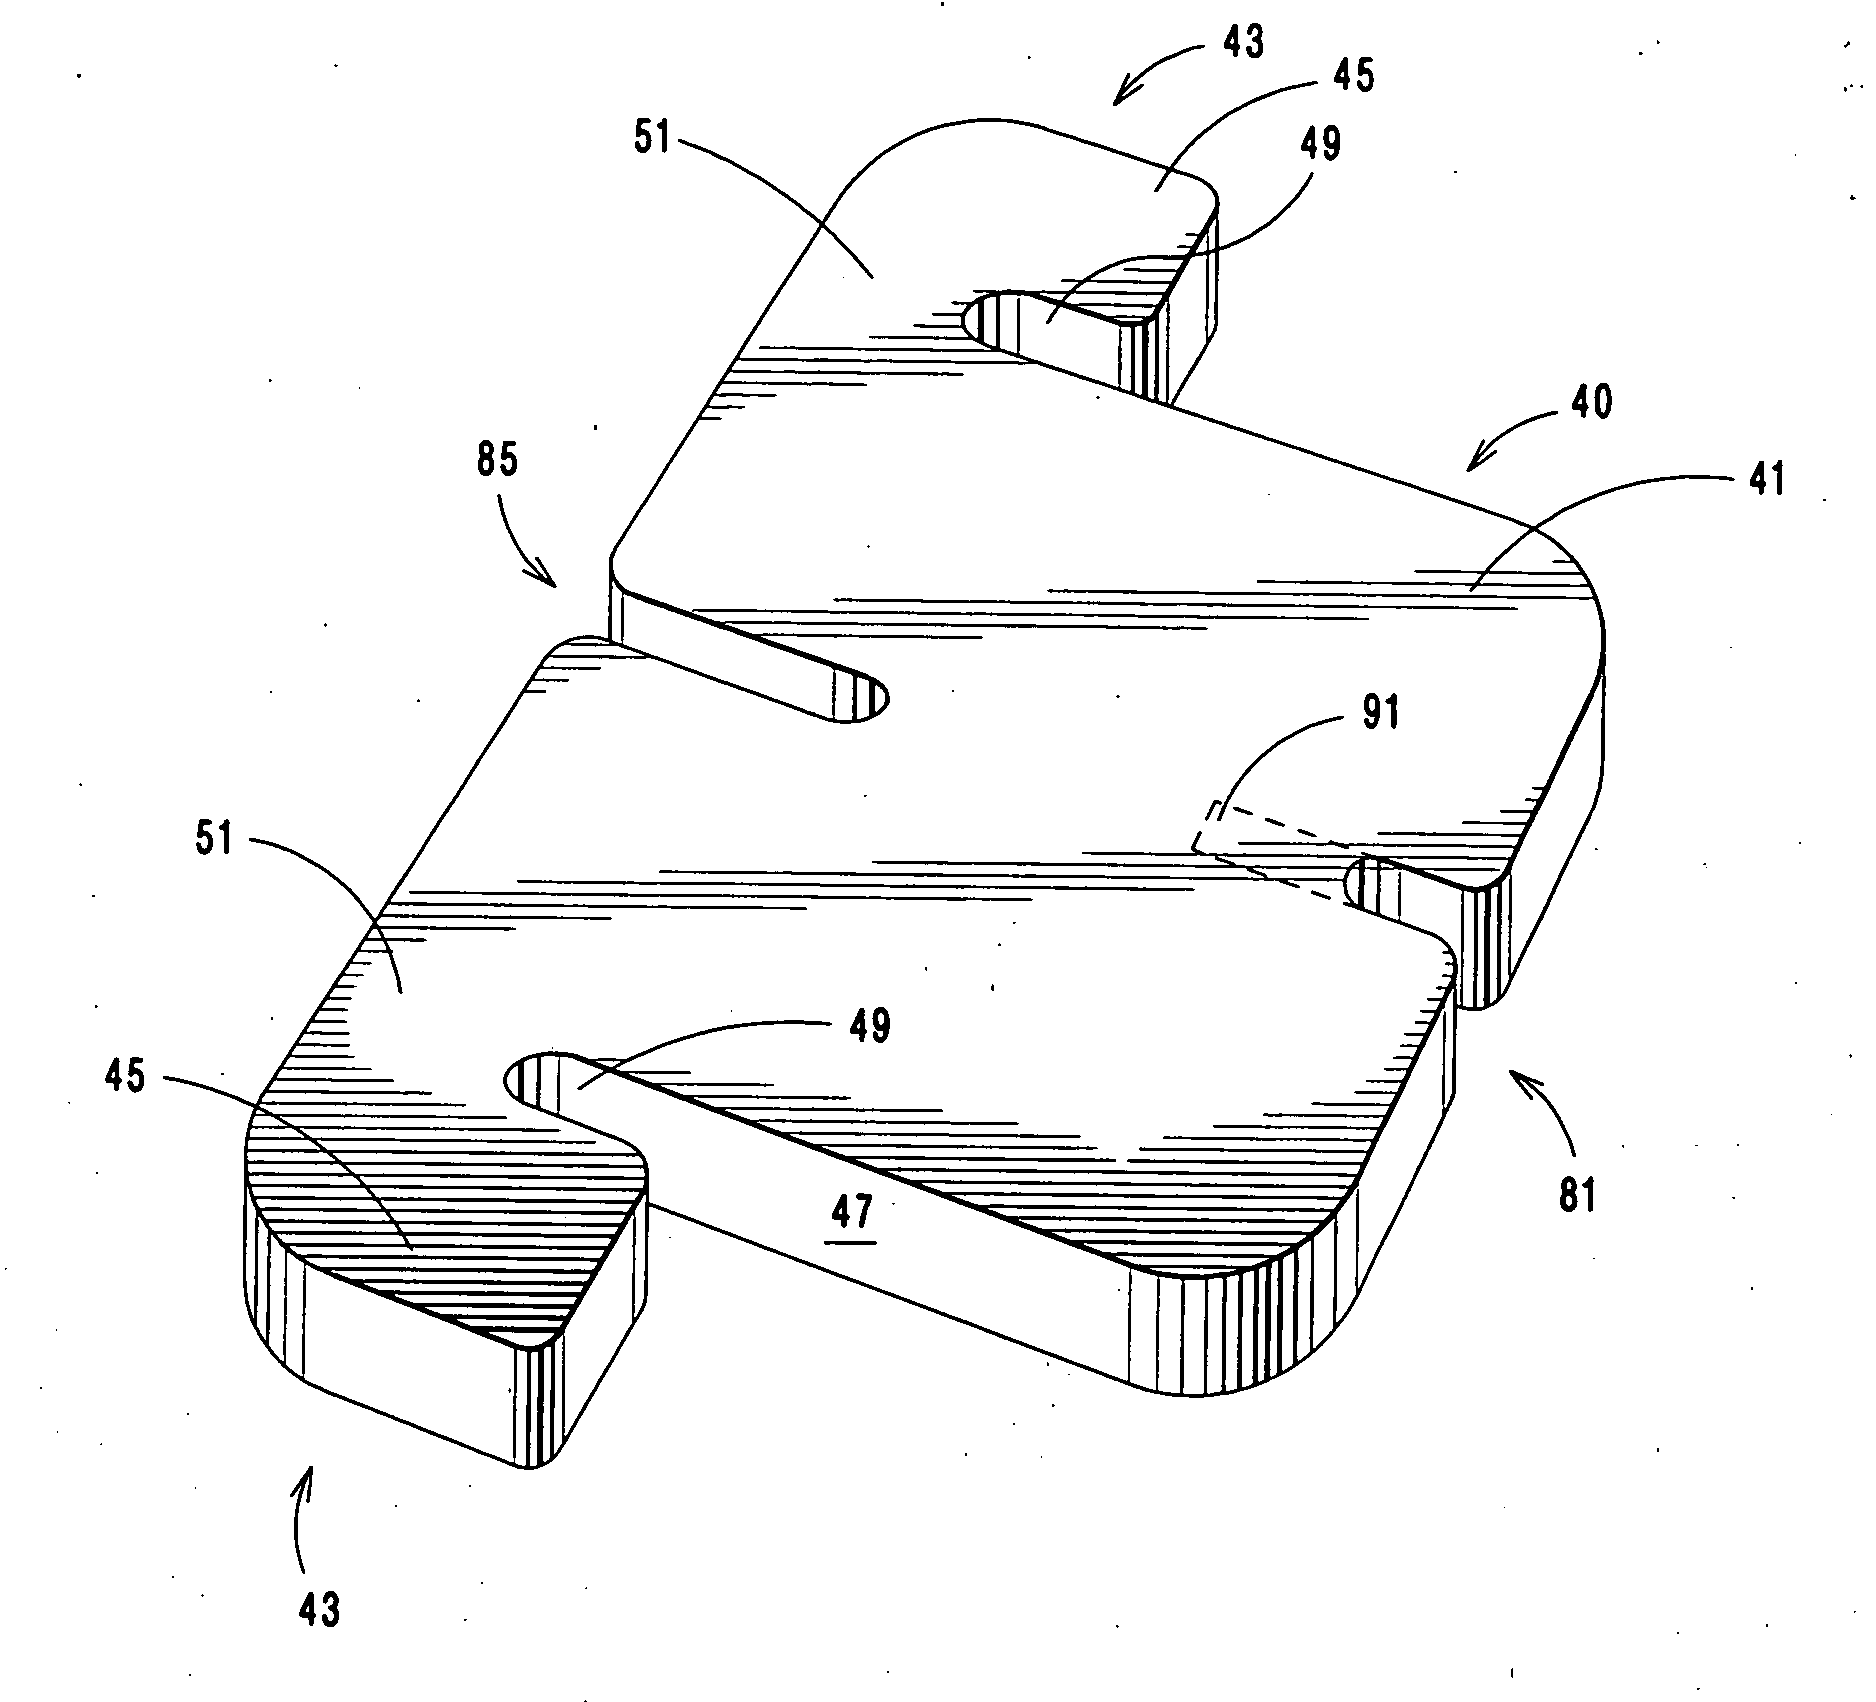 Standoff for use with uncoiled bare wire and insulated runs of an open coil electric resistance heater, method of use, and an open coil resistance heater using the standoff